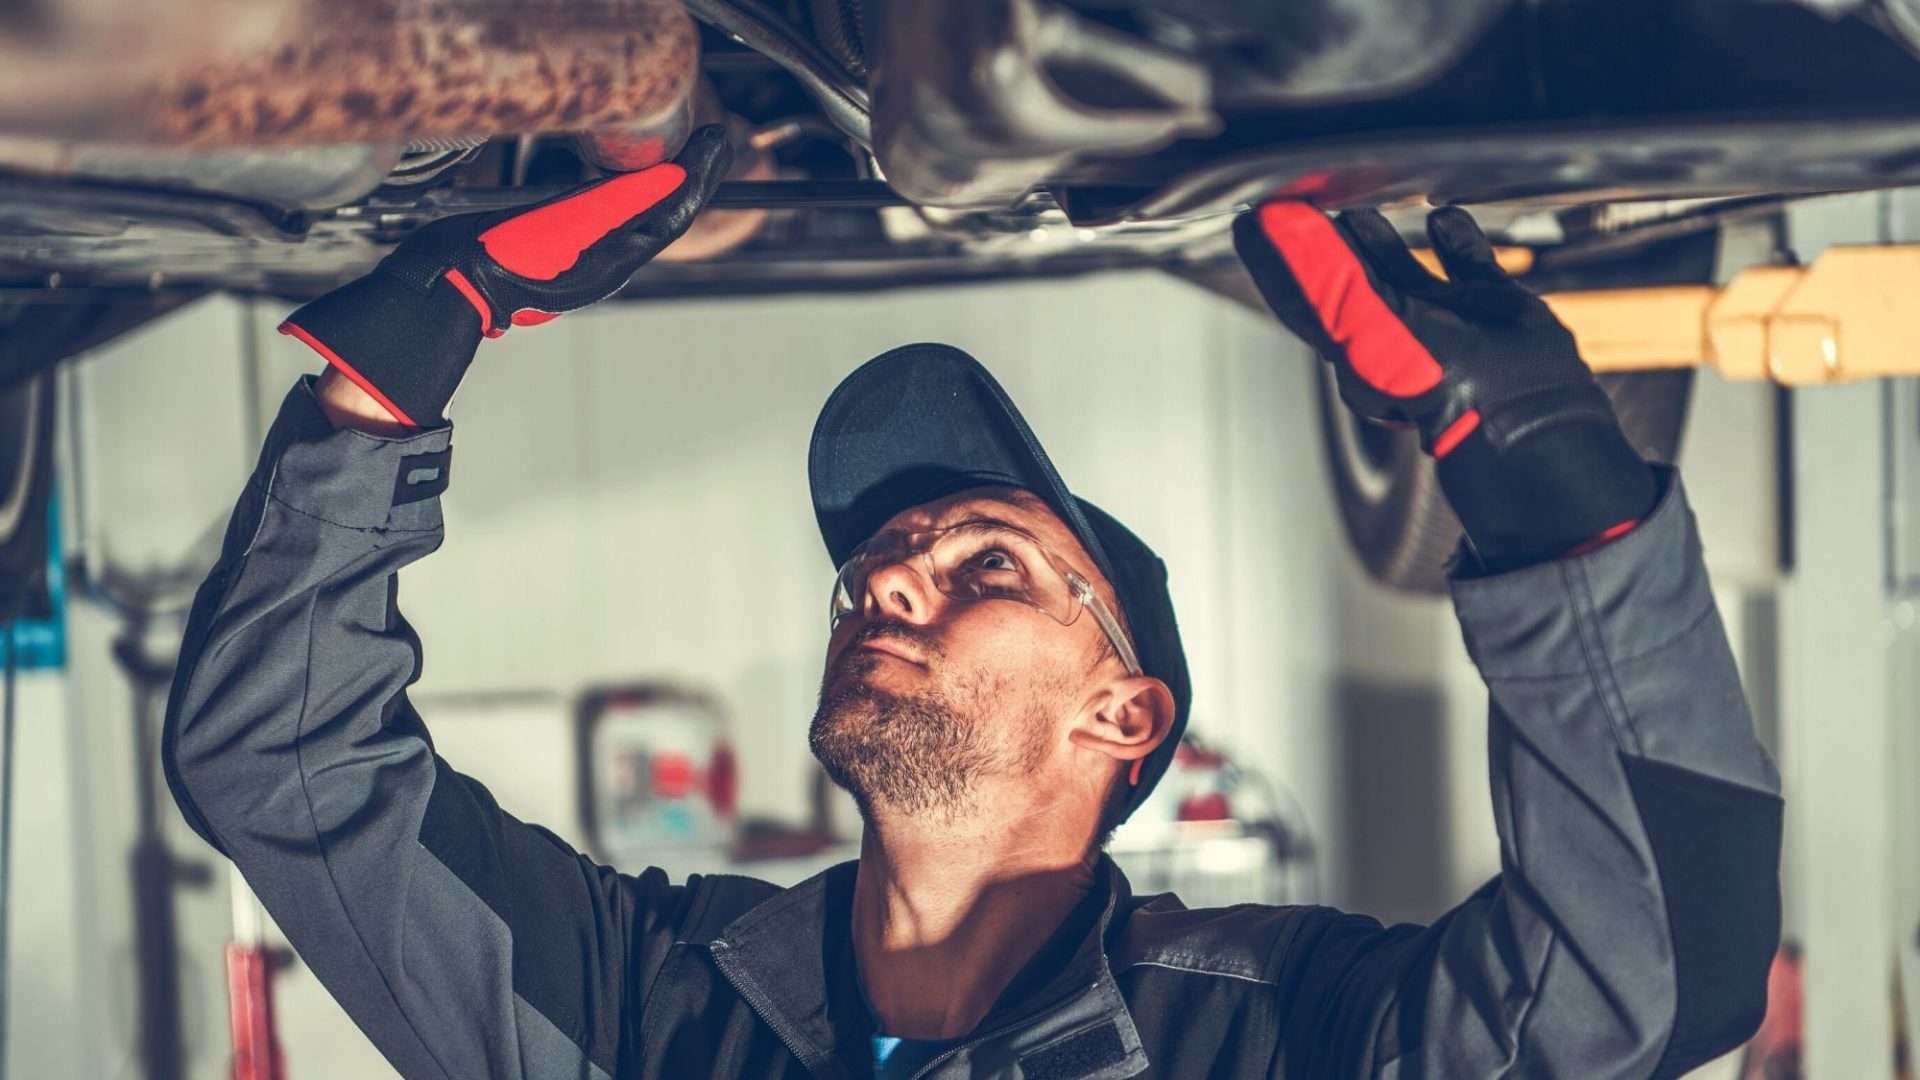 Mechanic removing rust from undercarriage of vehicle